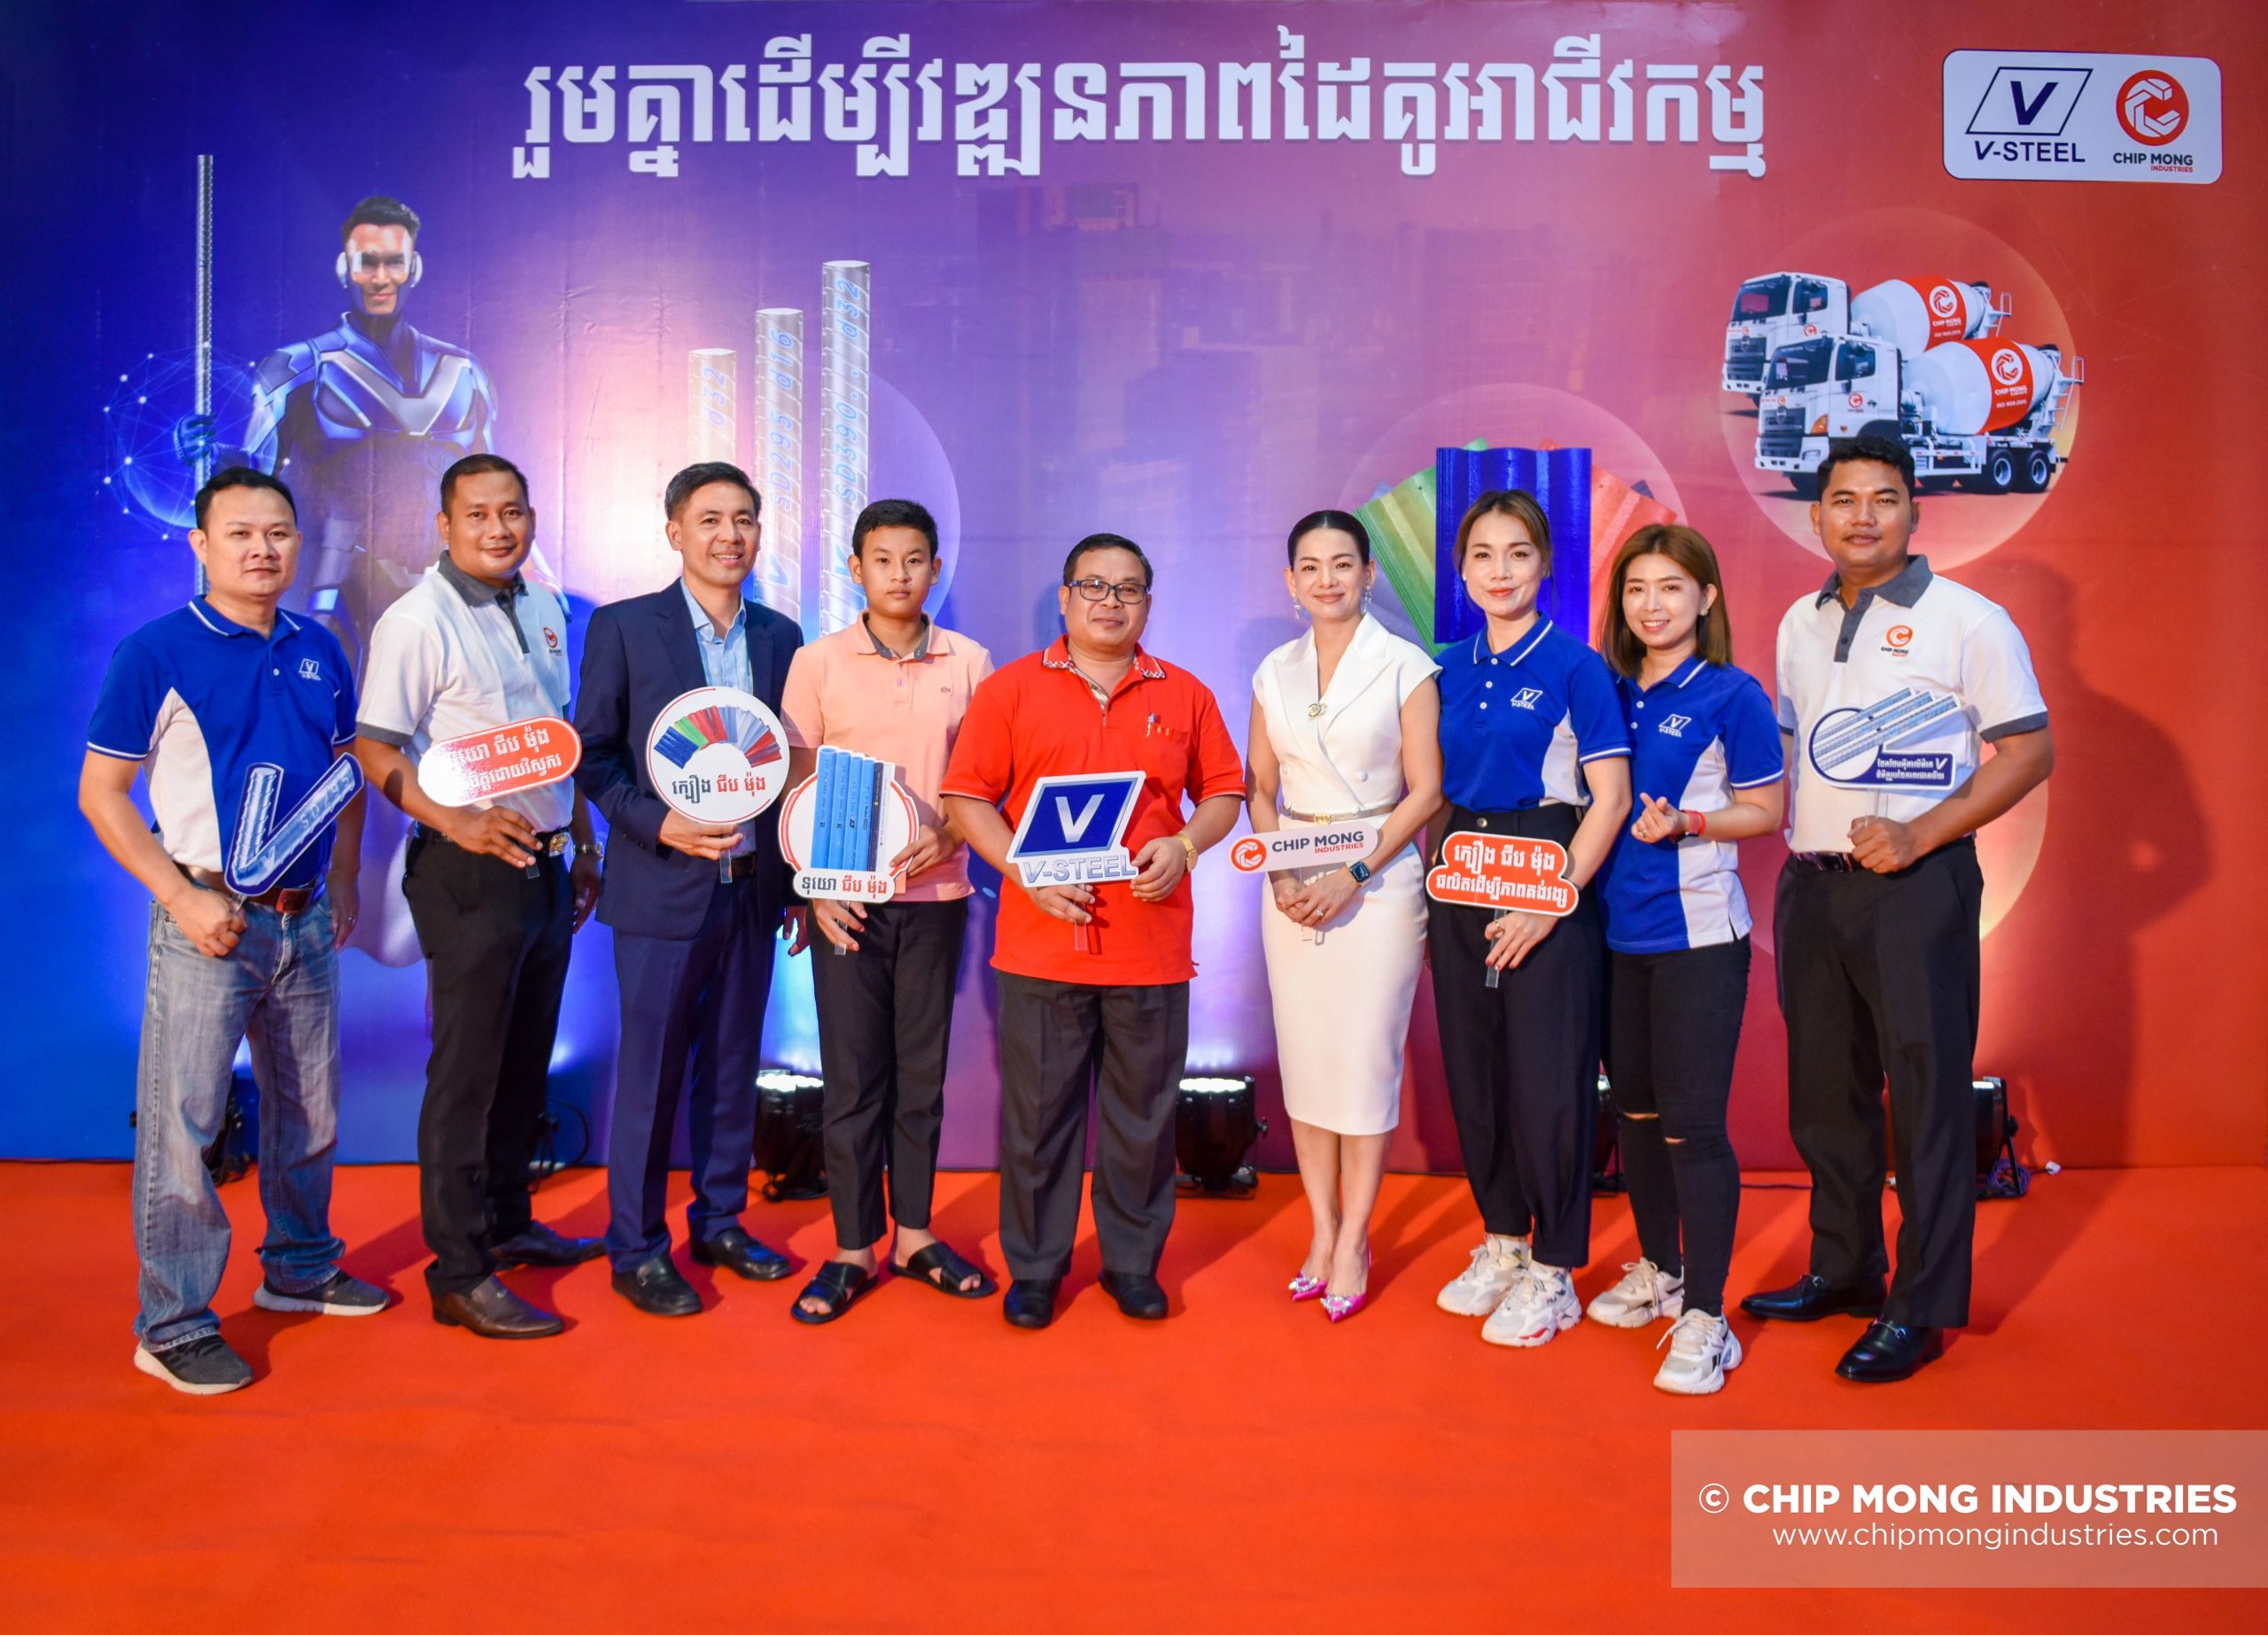 Chip Mong Industries Hosted a Party for Dealer in Siem Reap